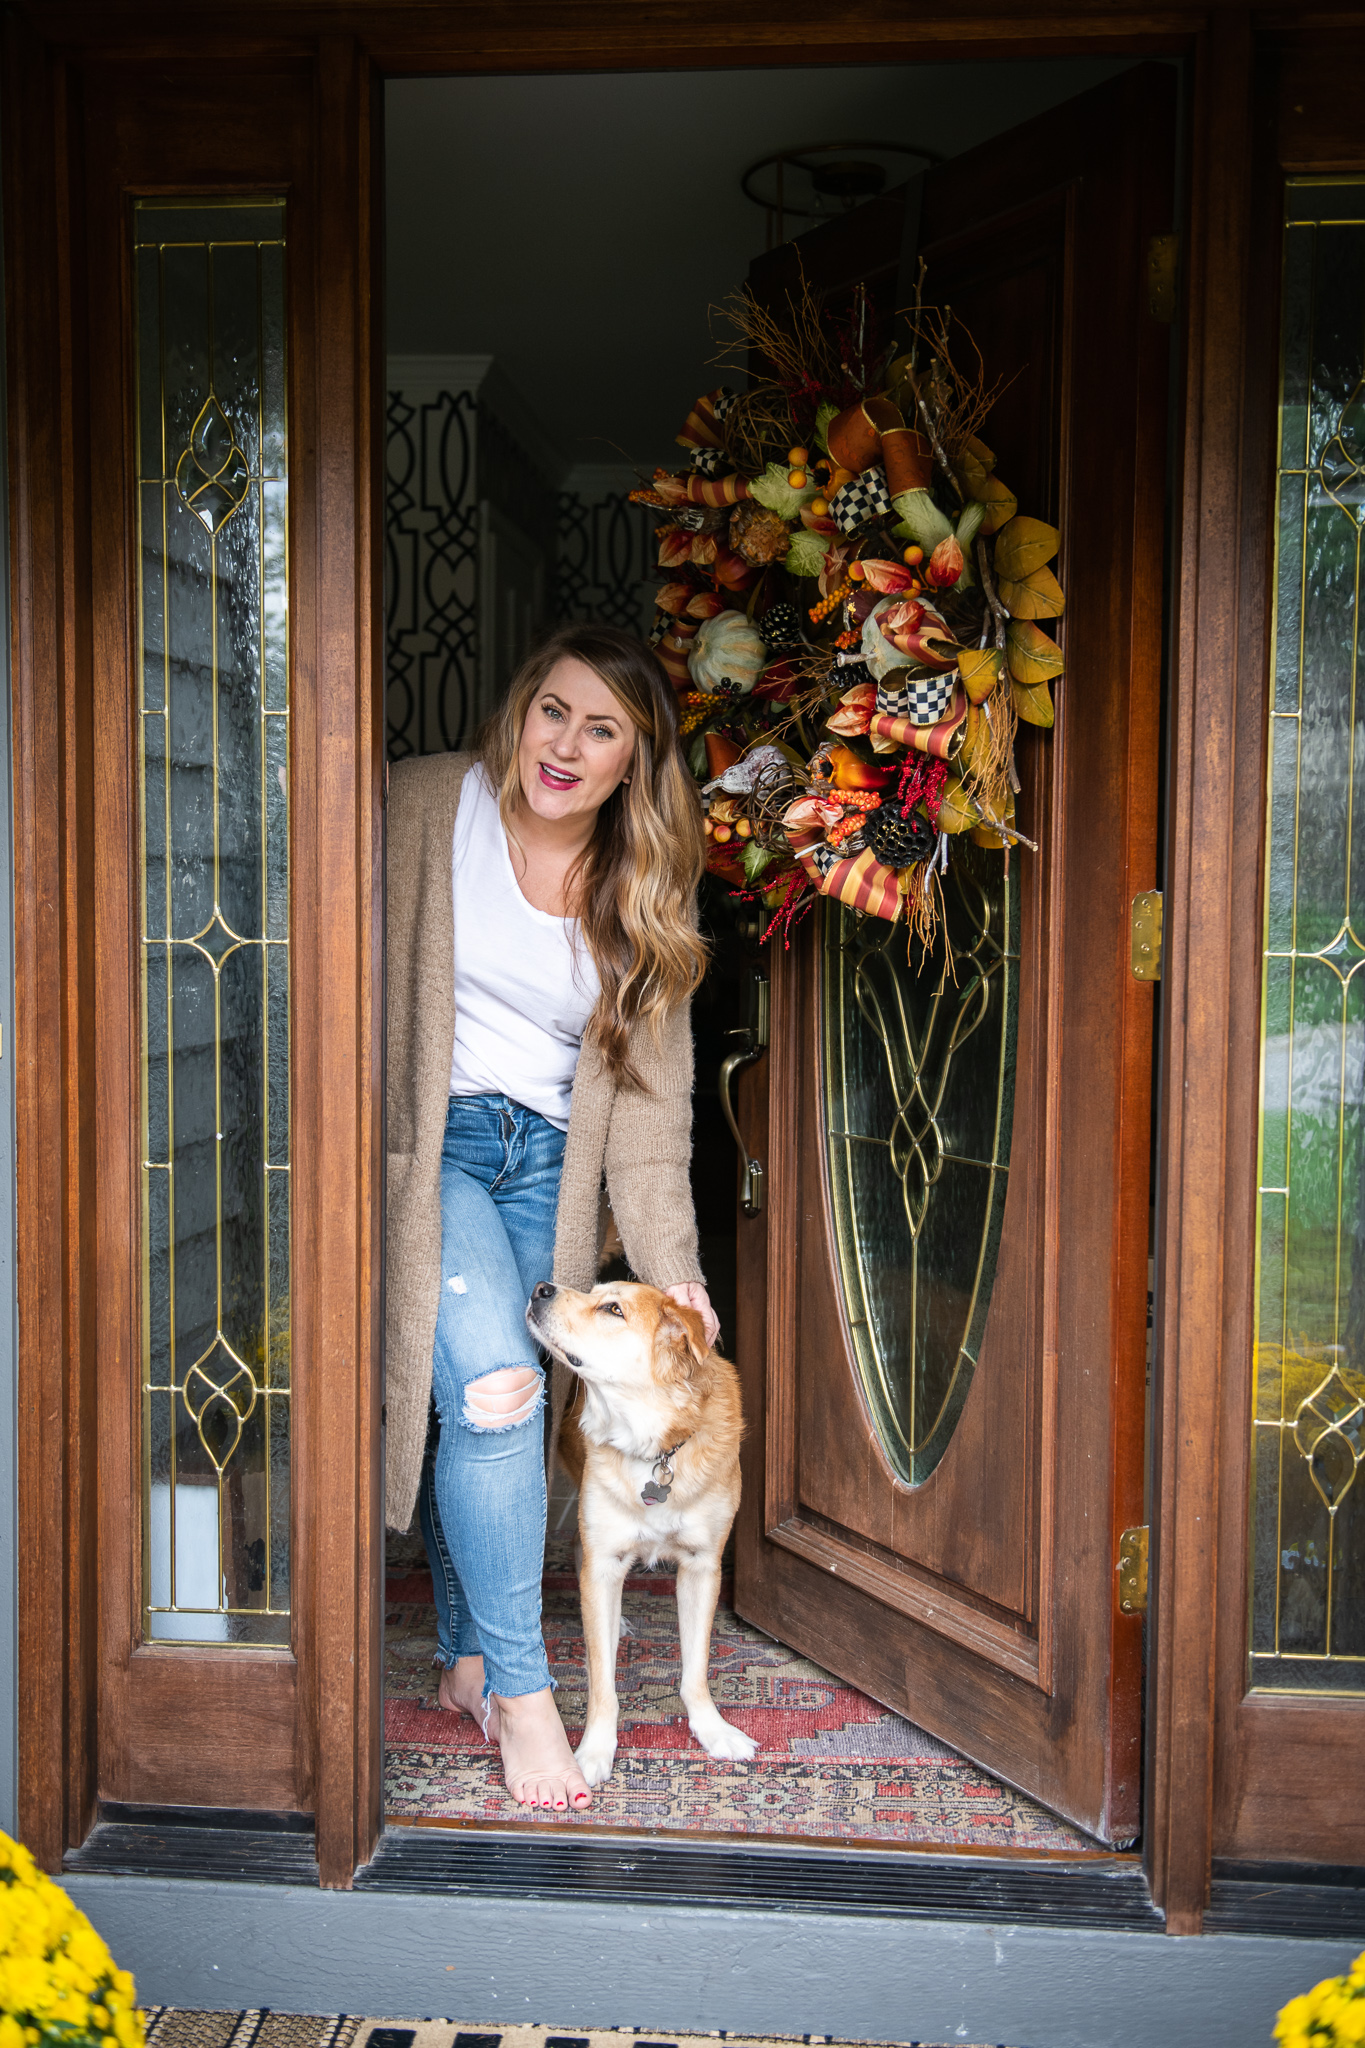 Super Cute Fall Front Porch Ideas featured by top Ohio lifestyle blog Coffee Beans and Bobby Pins